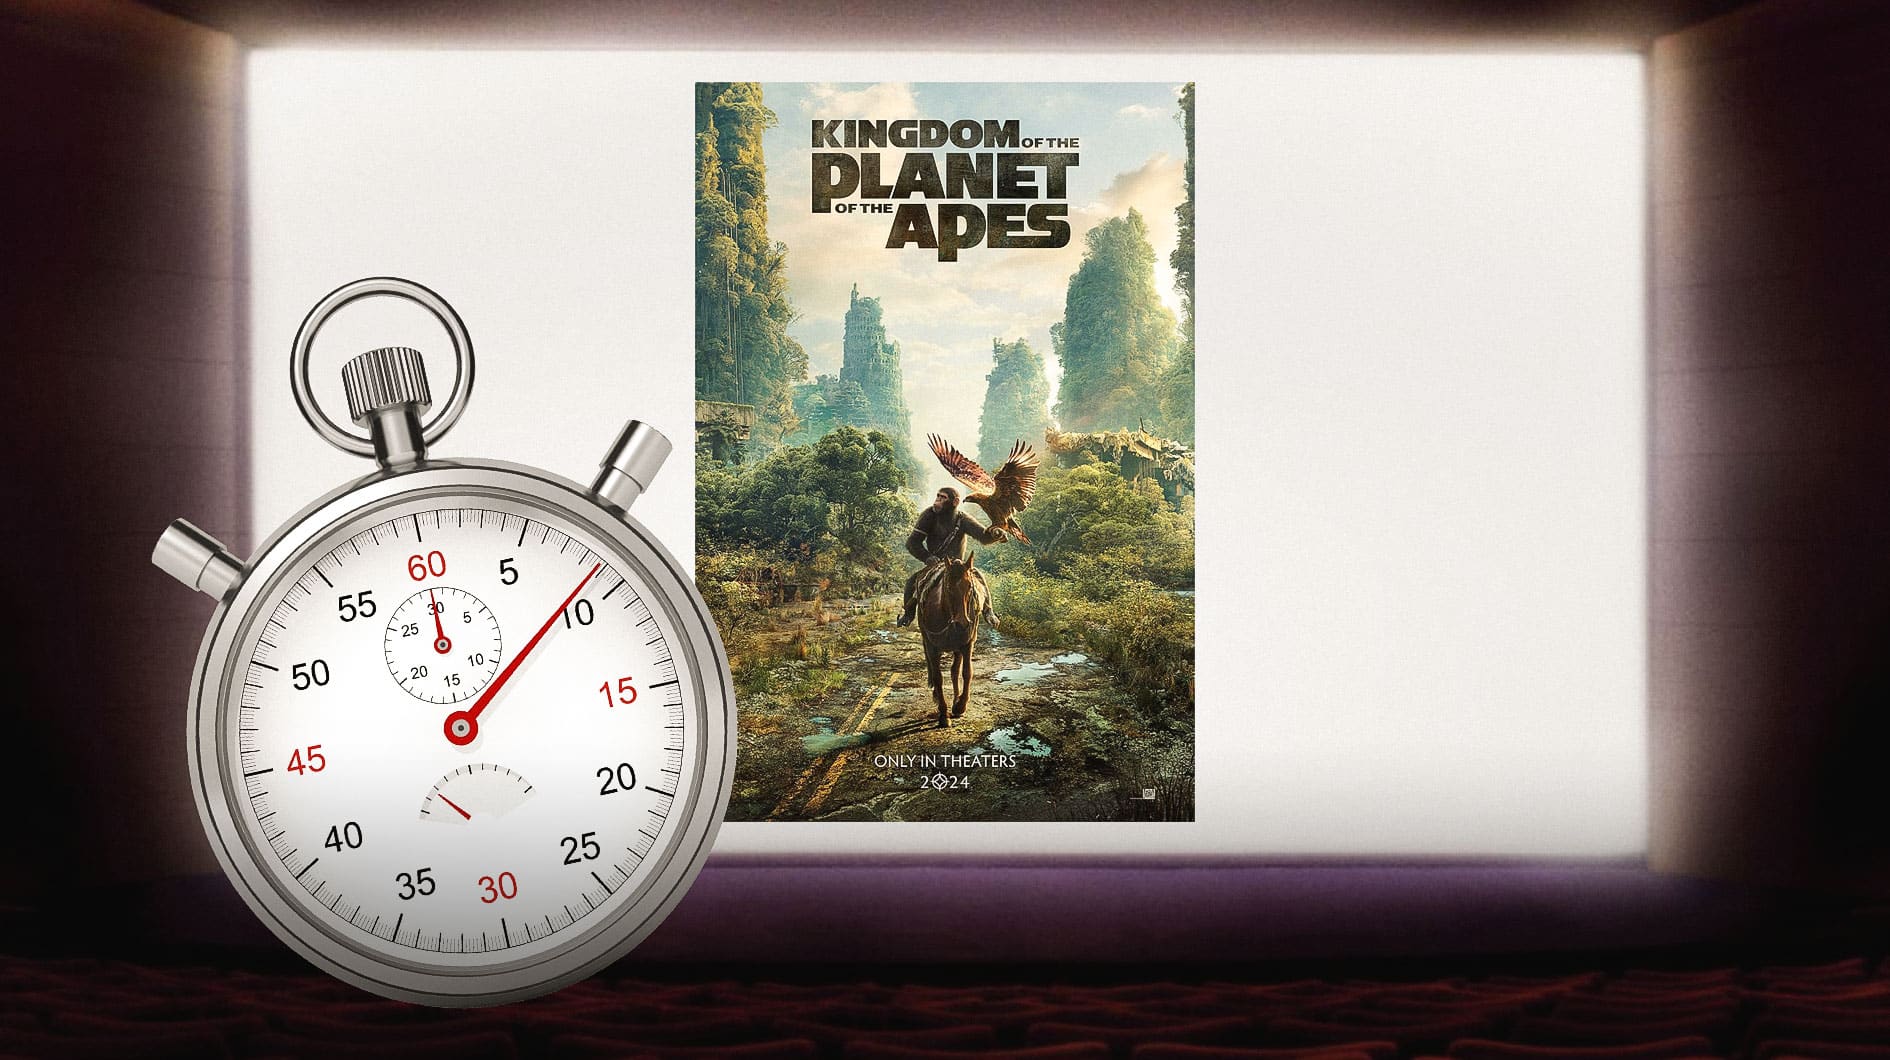 Kingdom of the Planet of the Apes poster on movie theater screen with stopwatch.